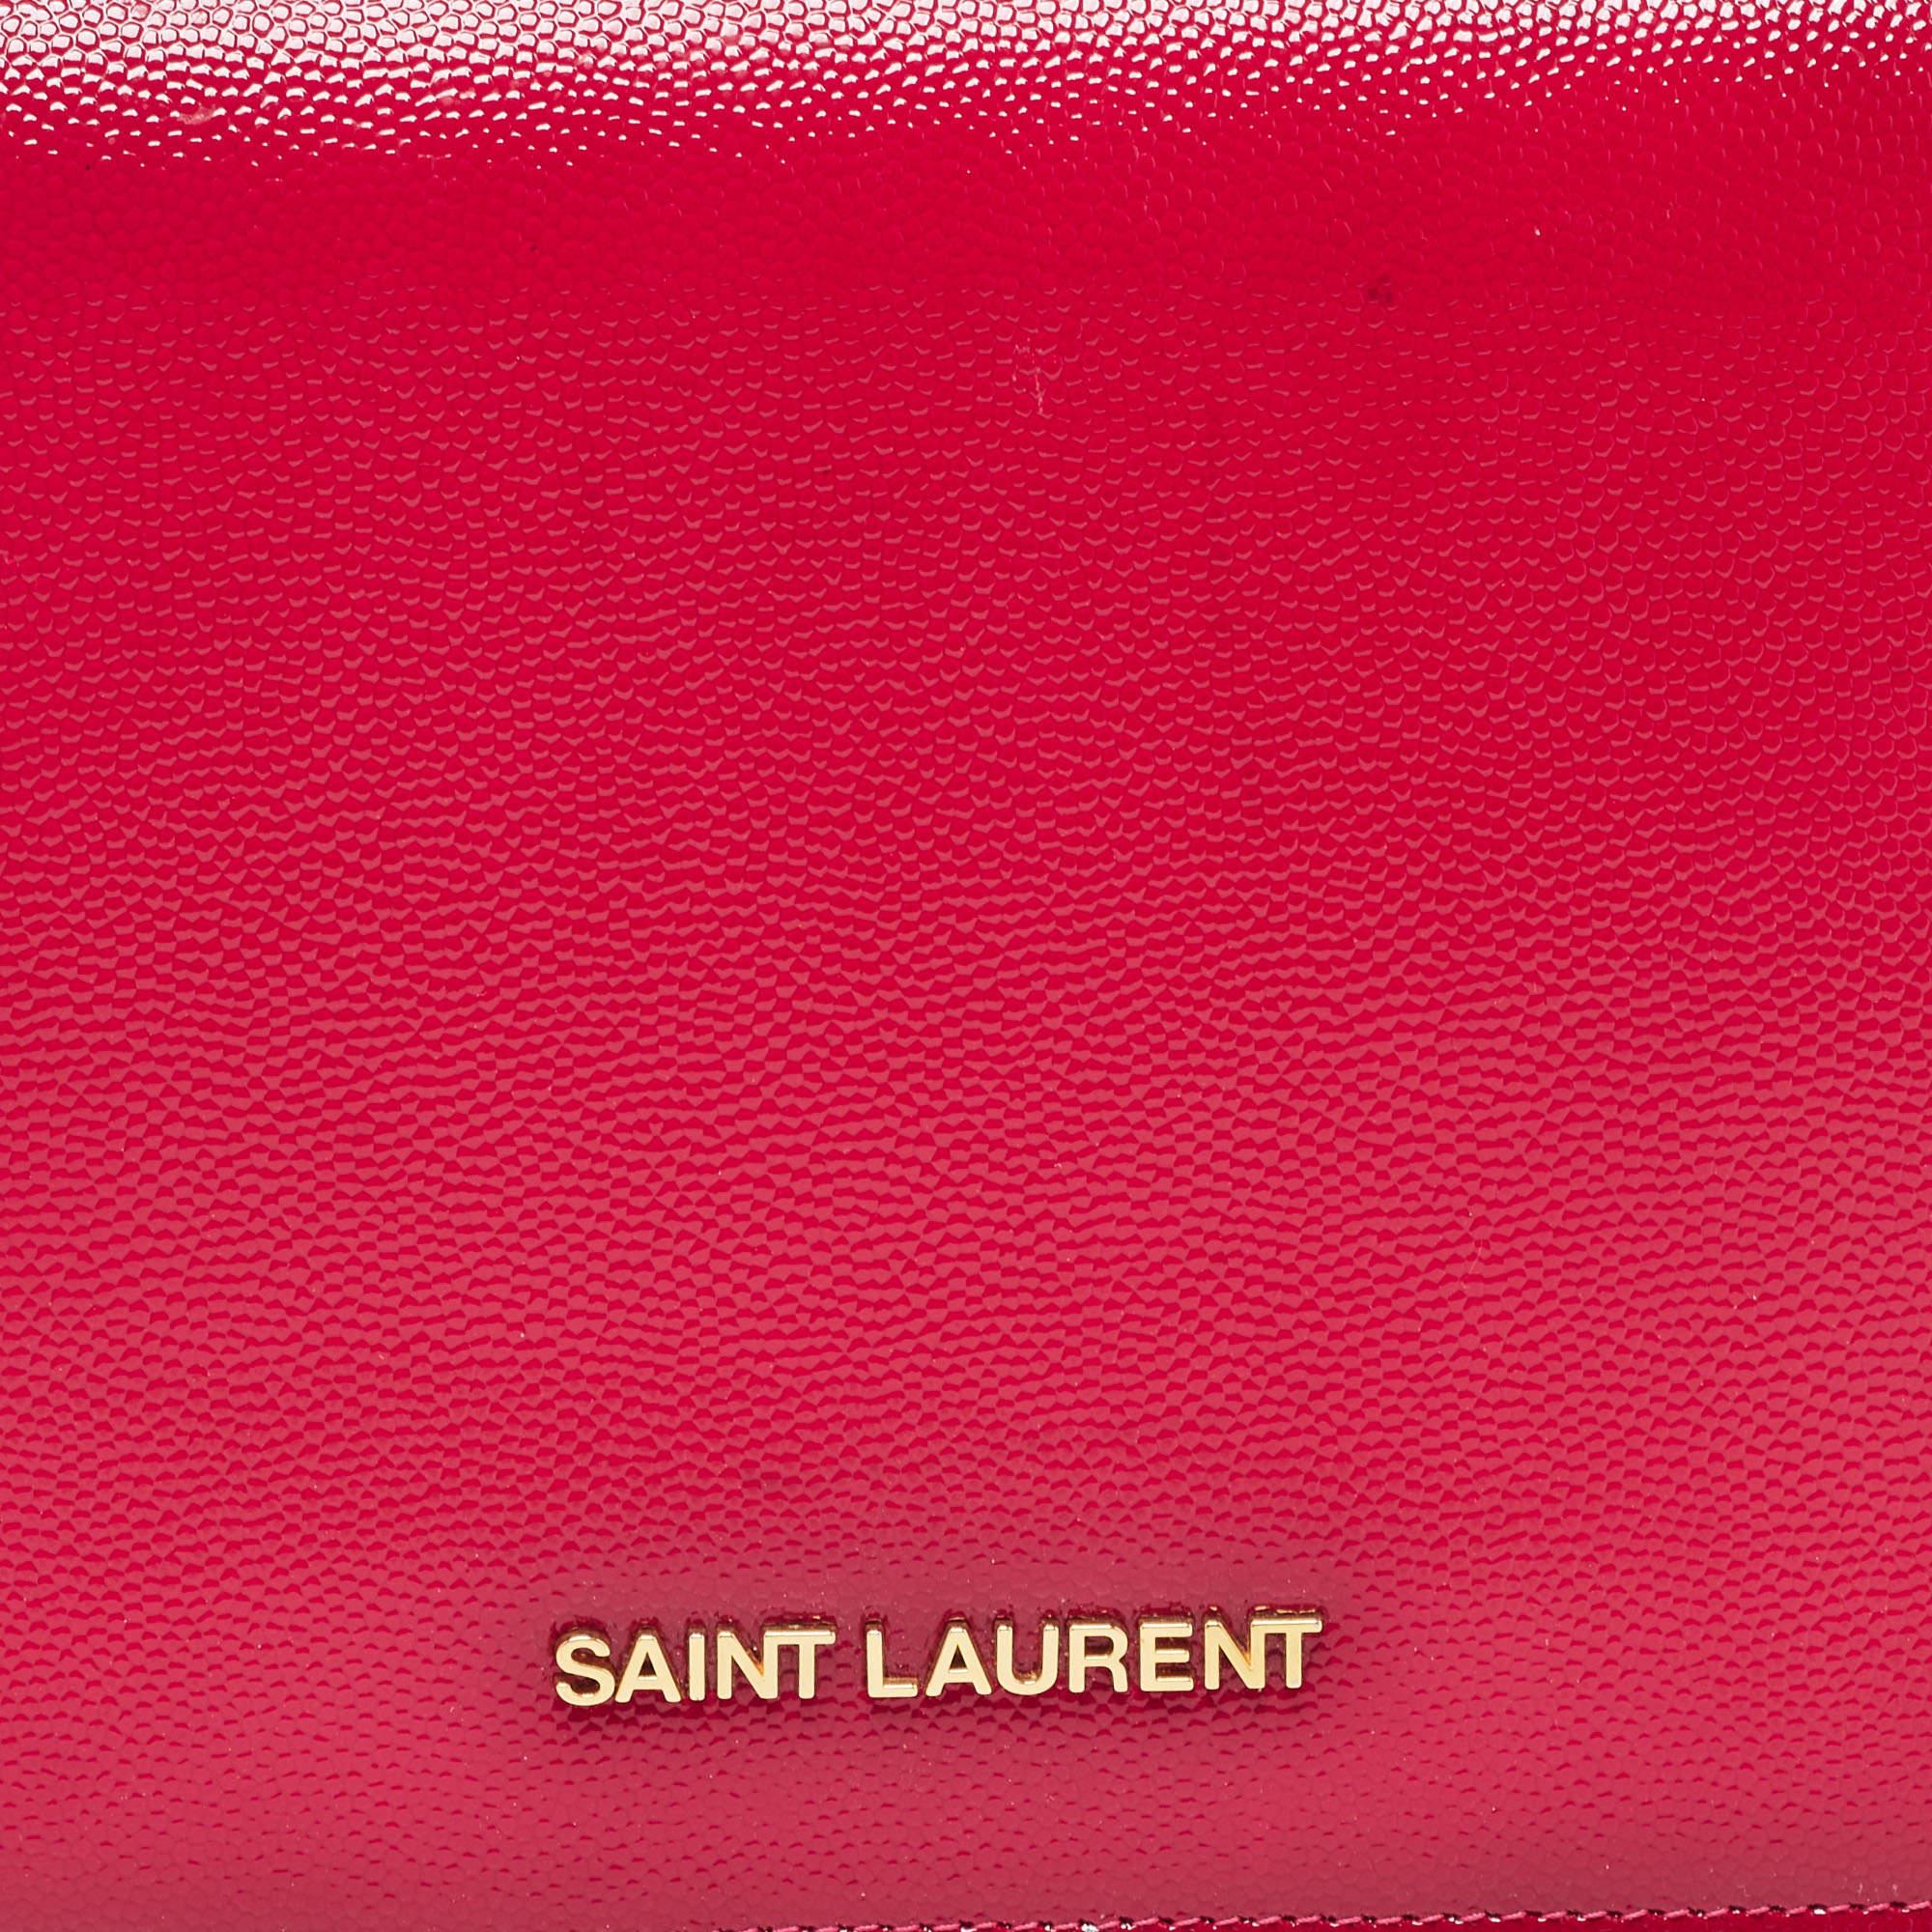 Saint Laurent Fuchsia Textured Patent Leather Classic Wallet on Chain 11